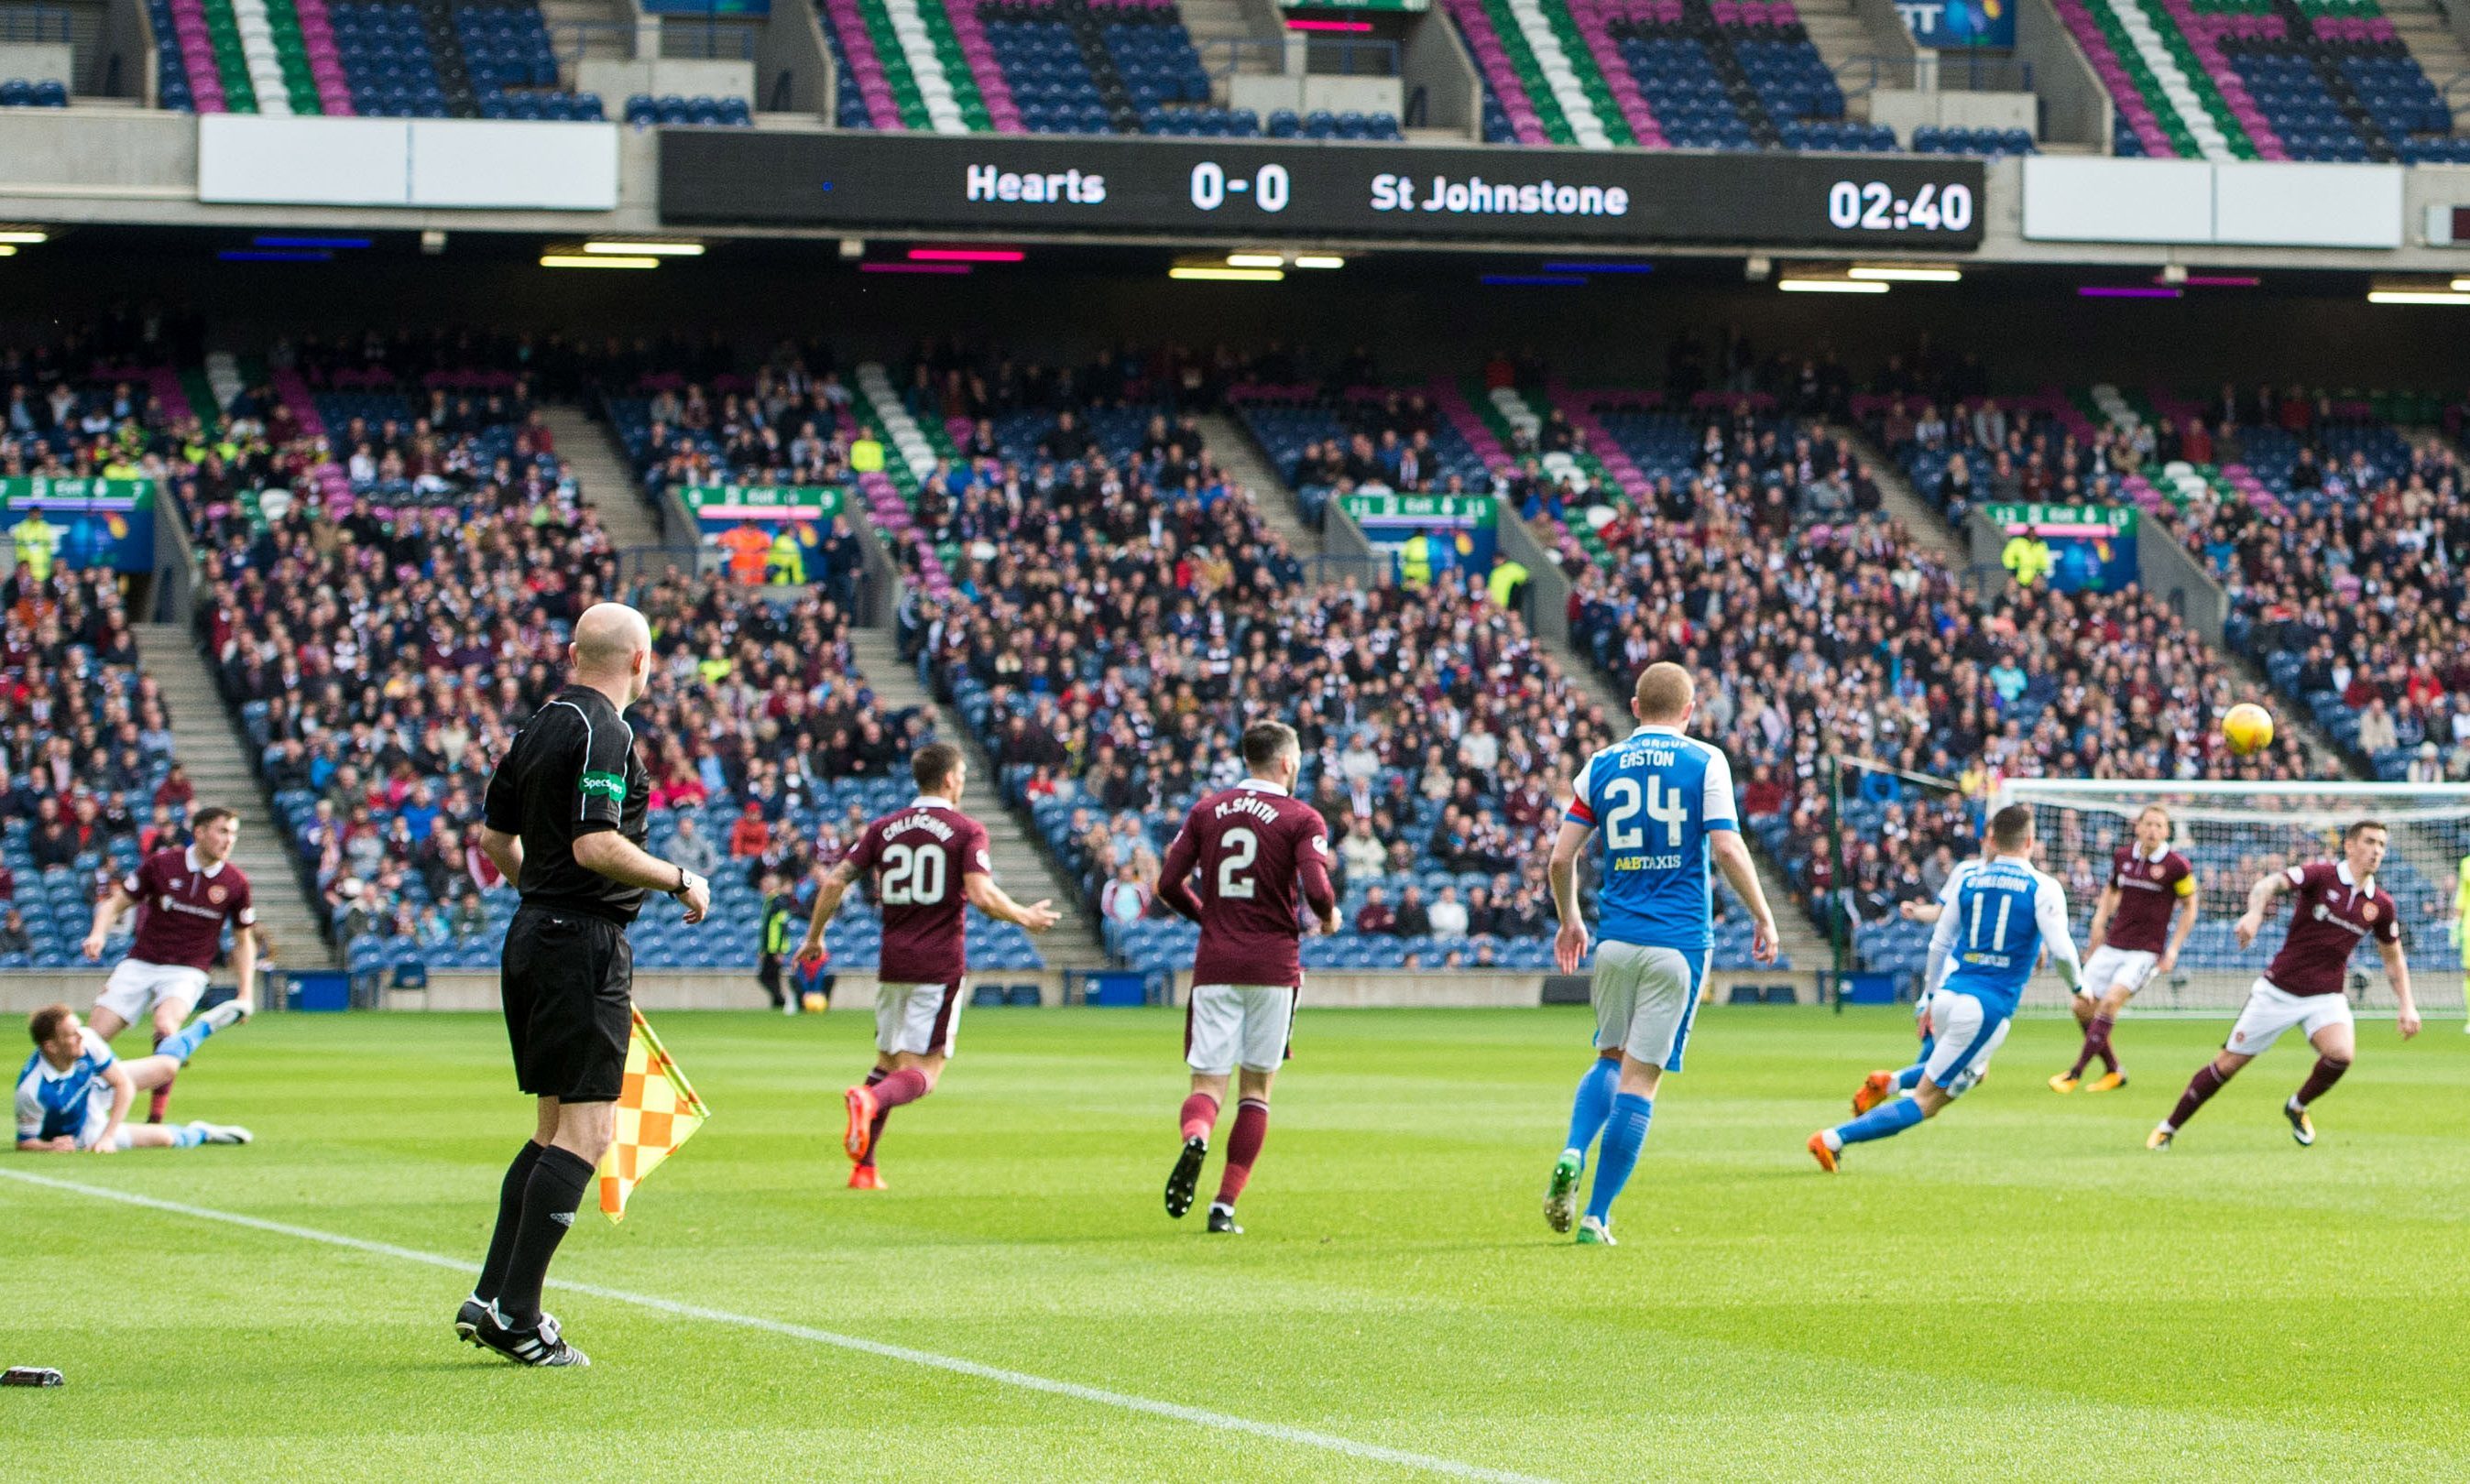 The incident happened after Saints played Hearts at Murrayfield.